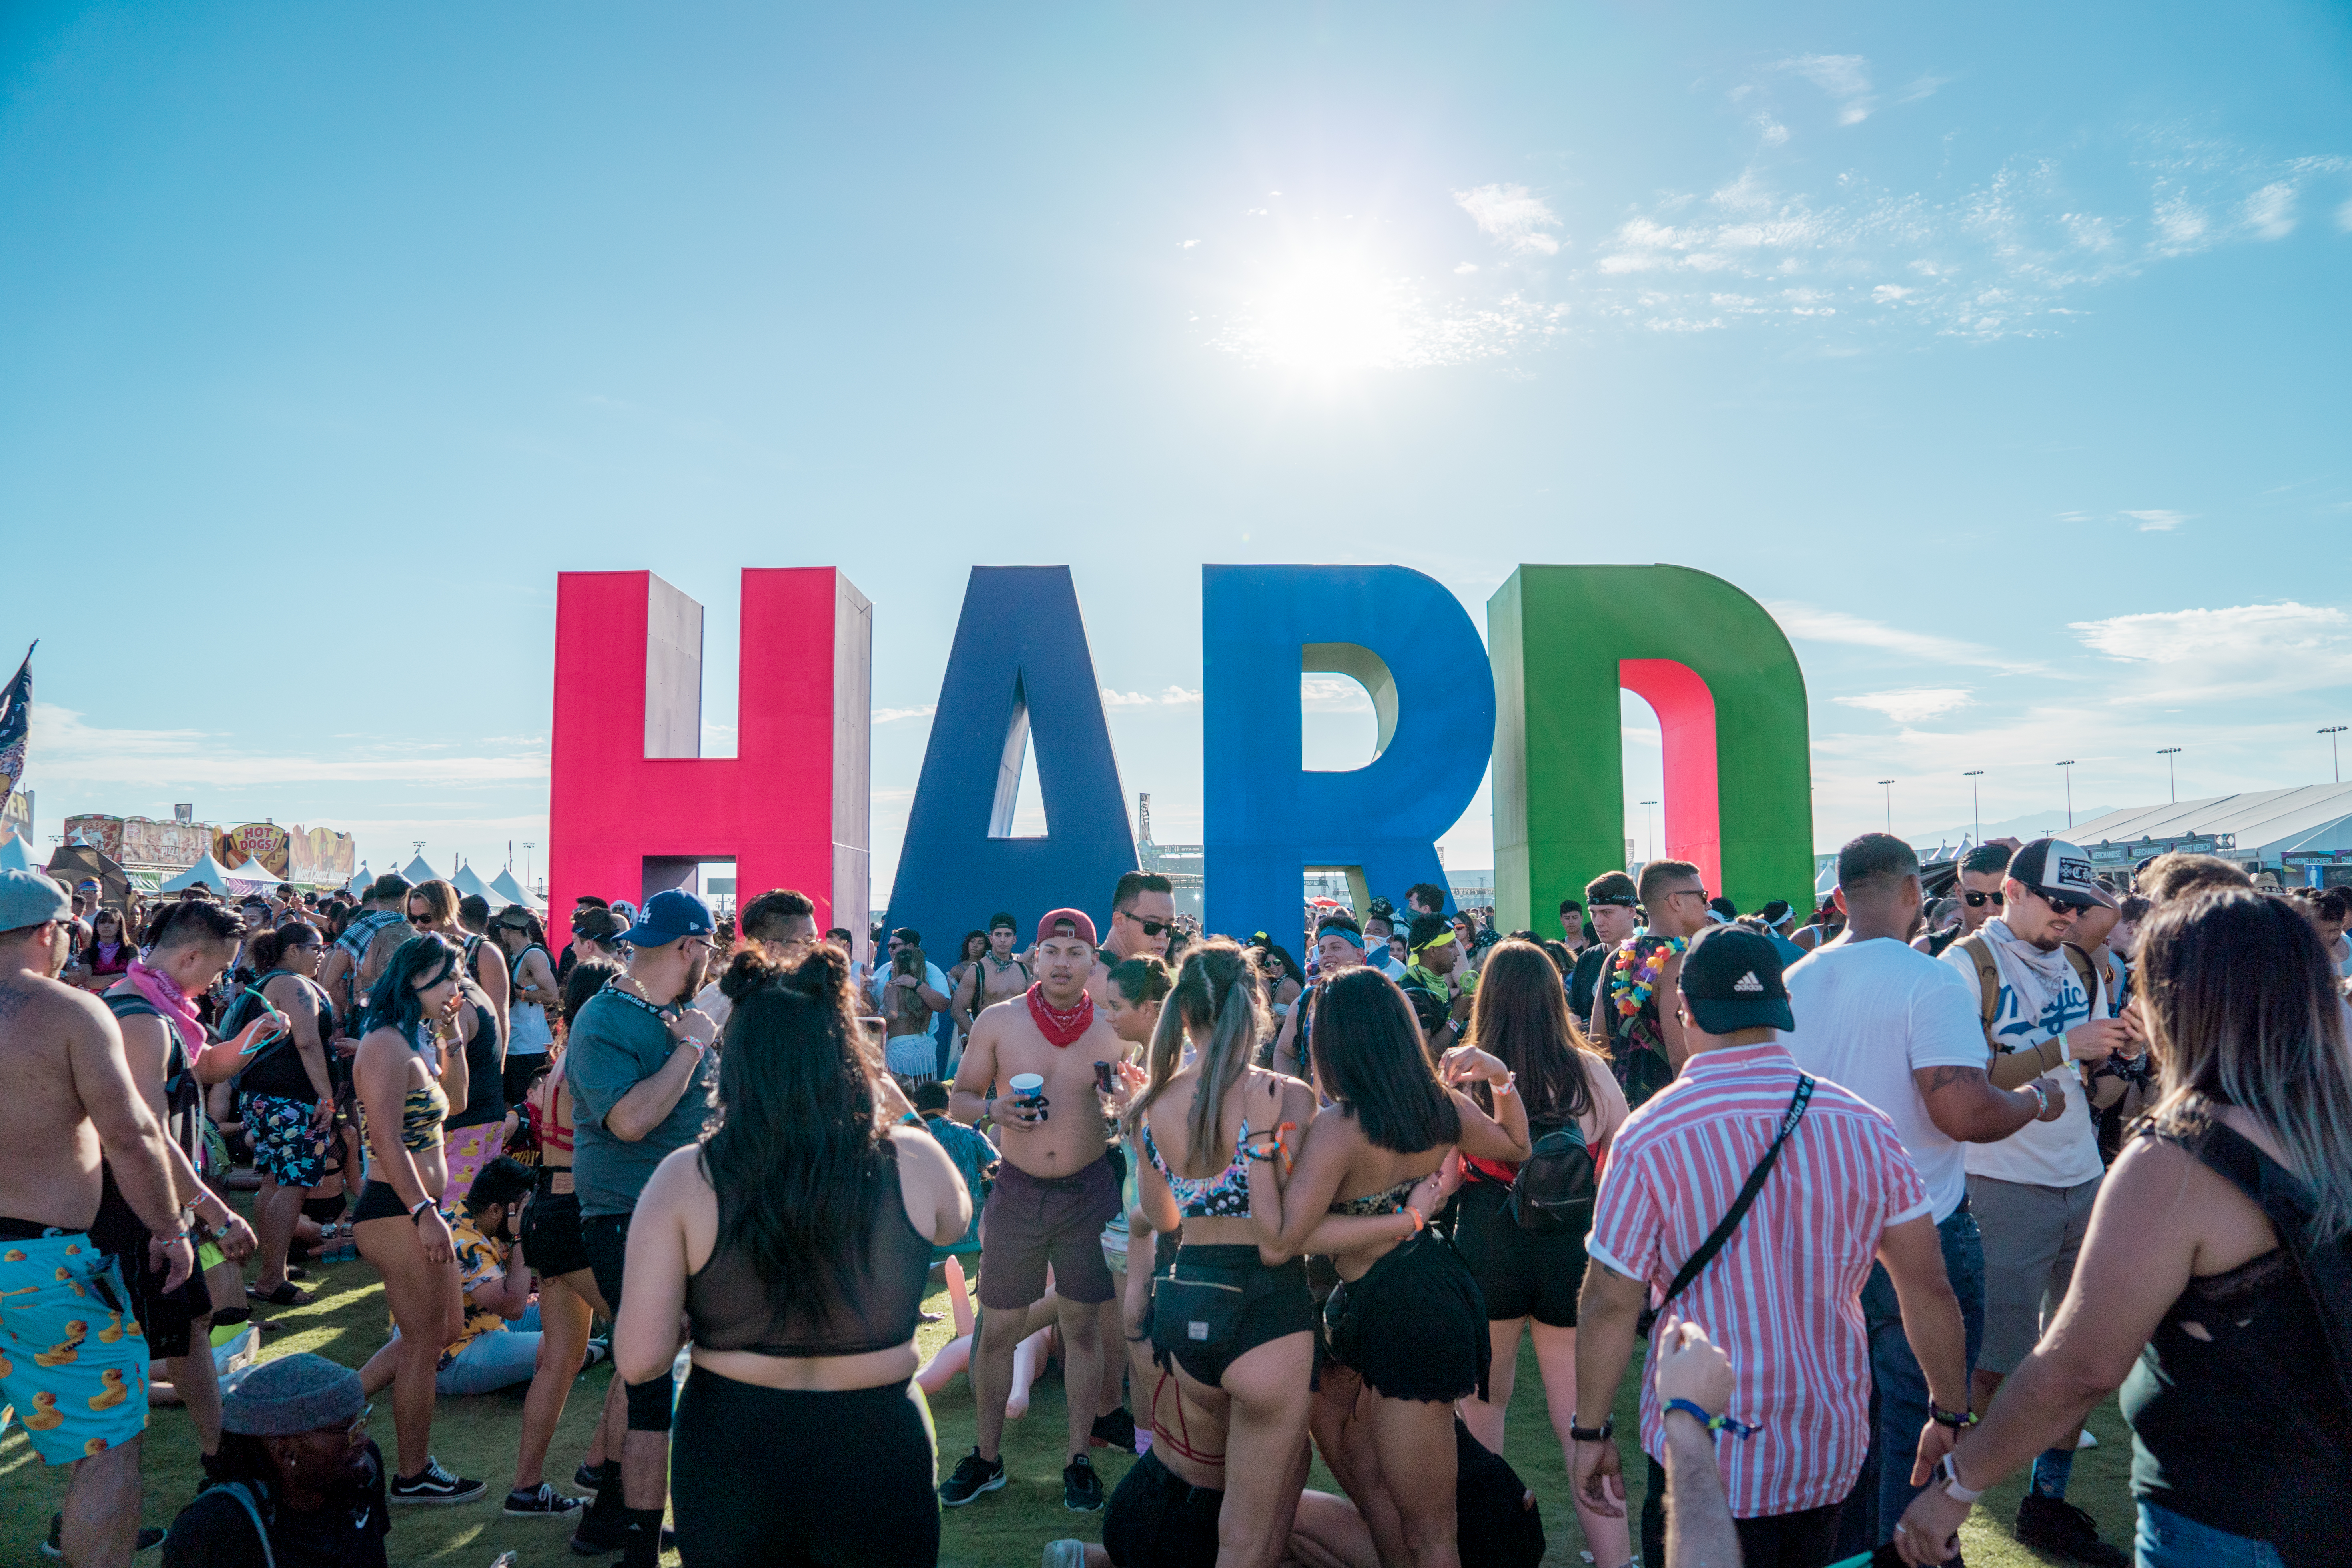 Hard Summer 2019 Brings the Heat to the Masses [Event Review]